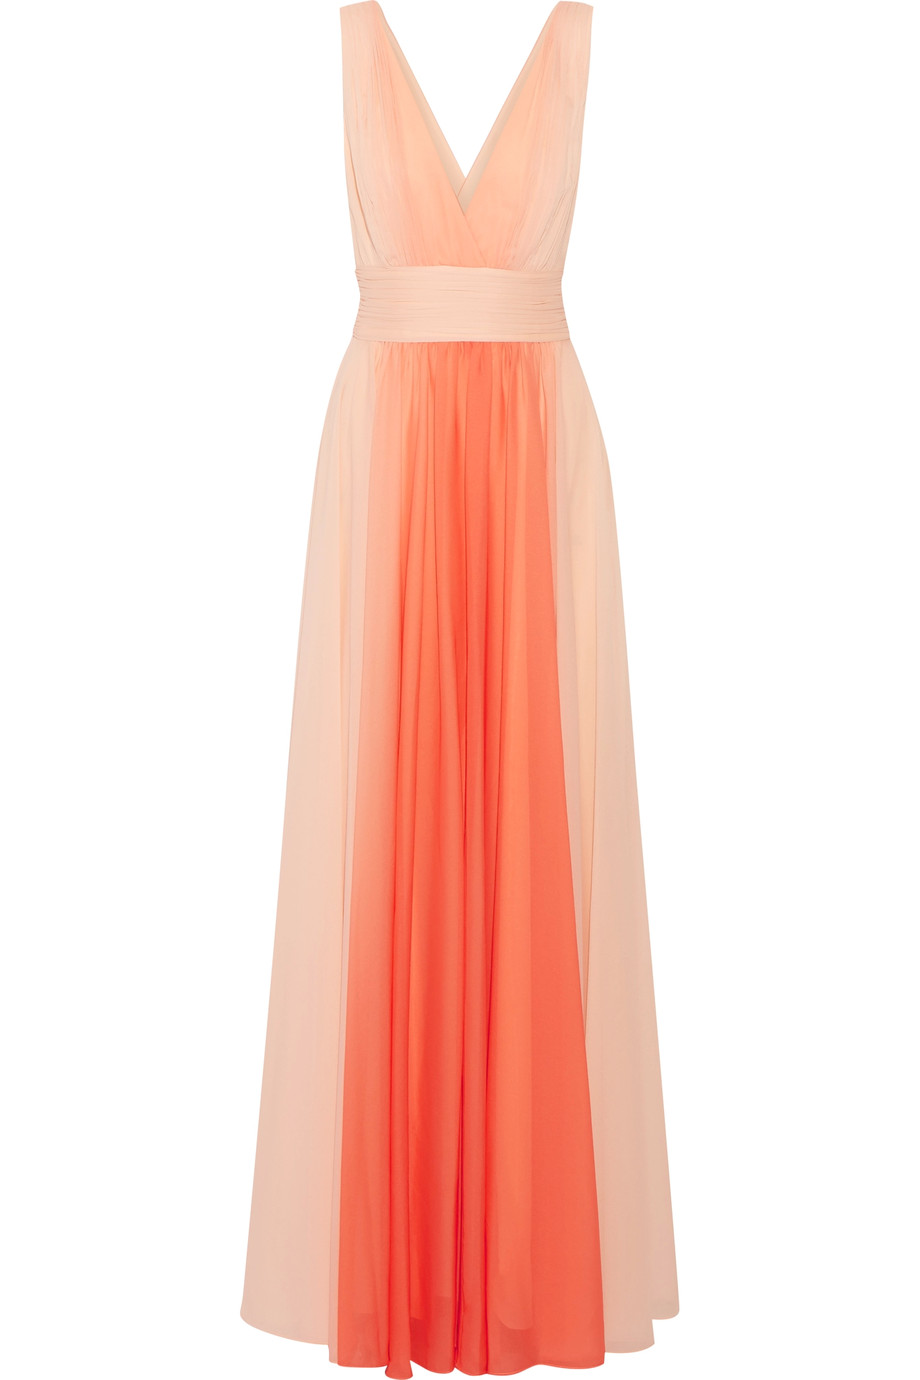 HALSTON HERITAGE OMBRÉ PLEATED CHIFFON GOWN | ModeSens